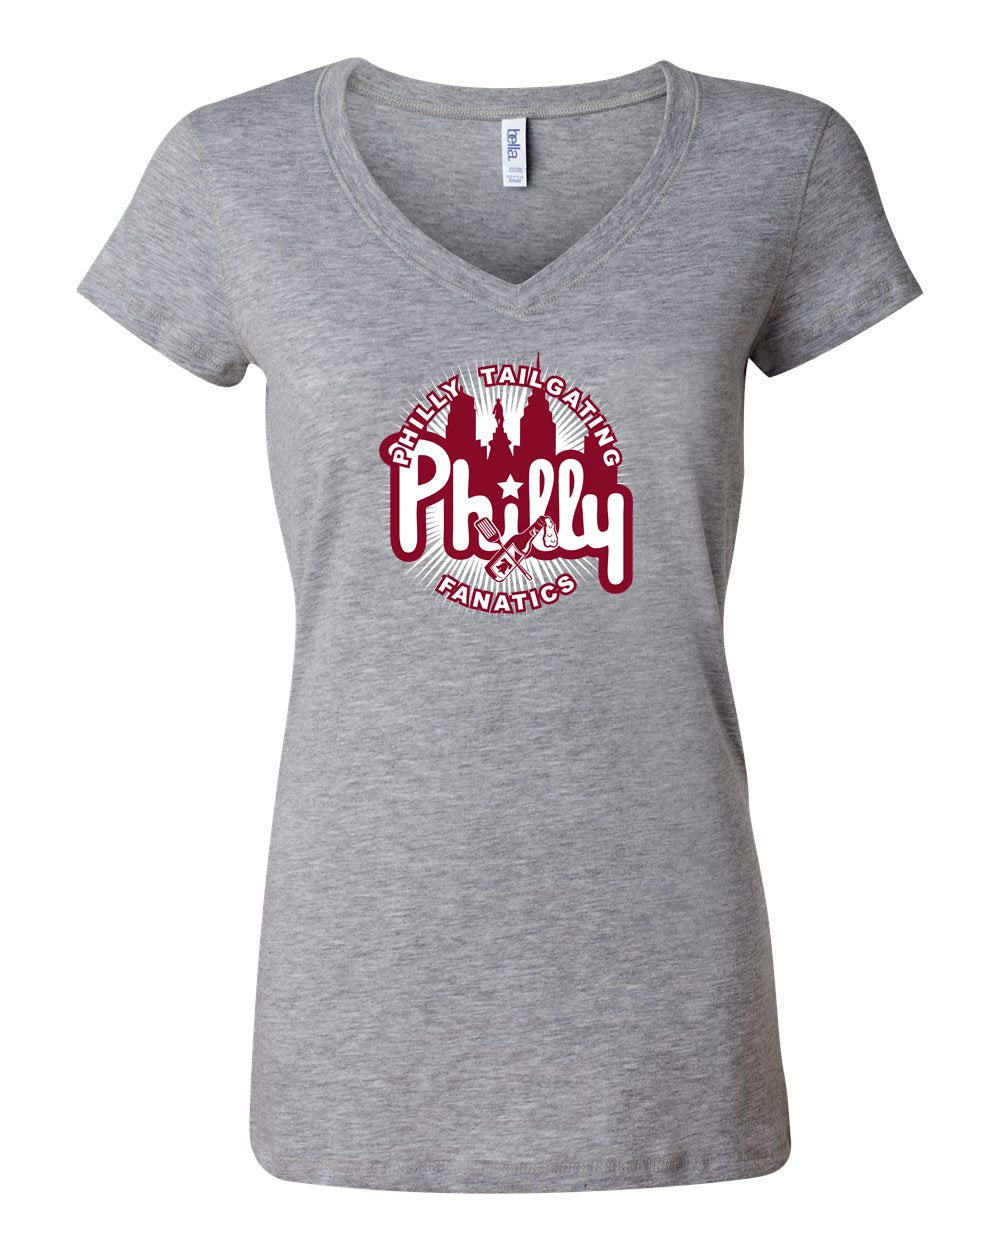 Philly Tailgating LADIES Junior Fit V-Neck